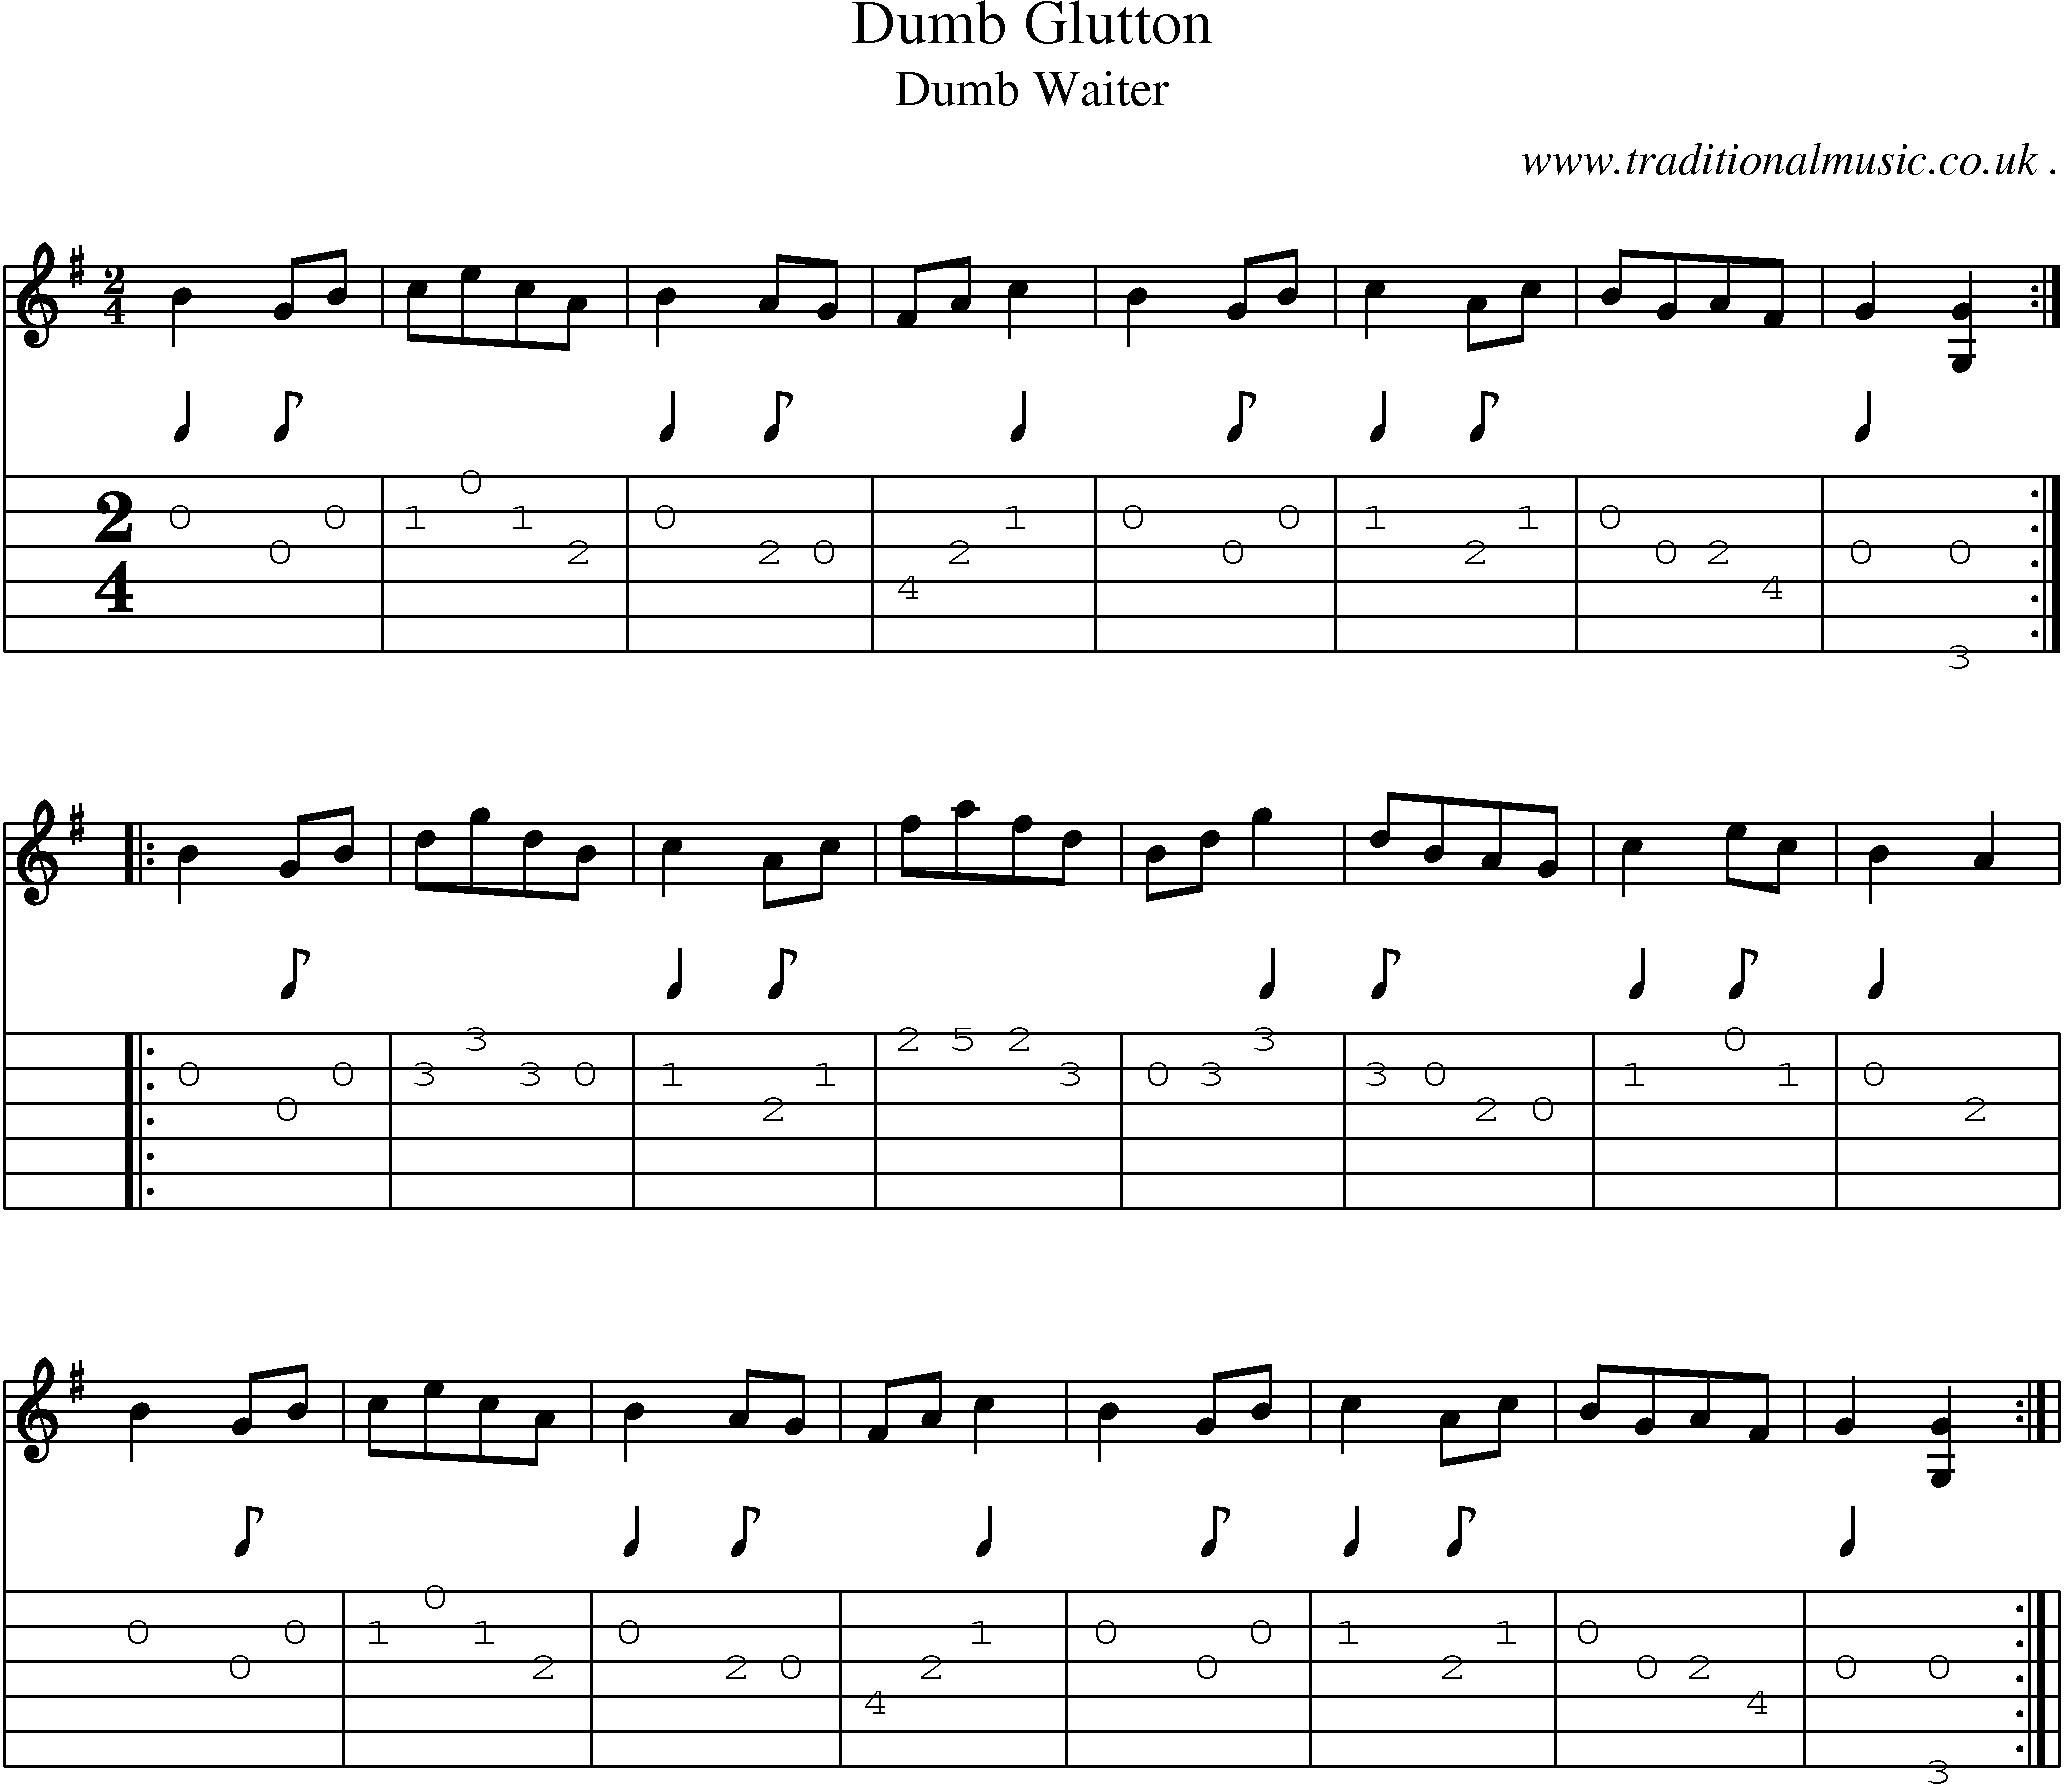 Sheet-Music and Guitar Tabs for Dumb Glutton